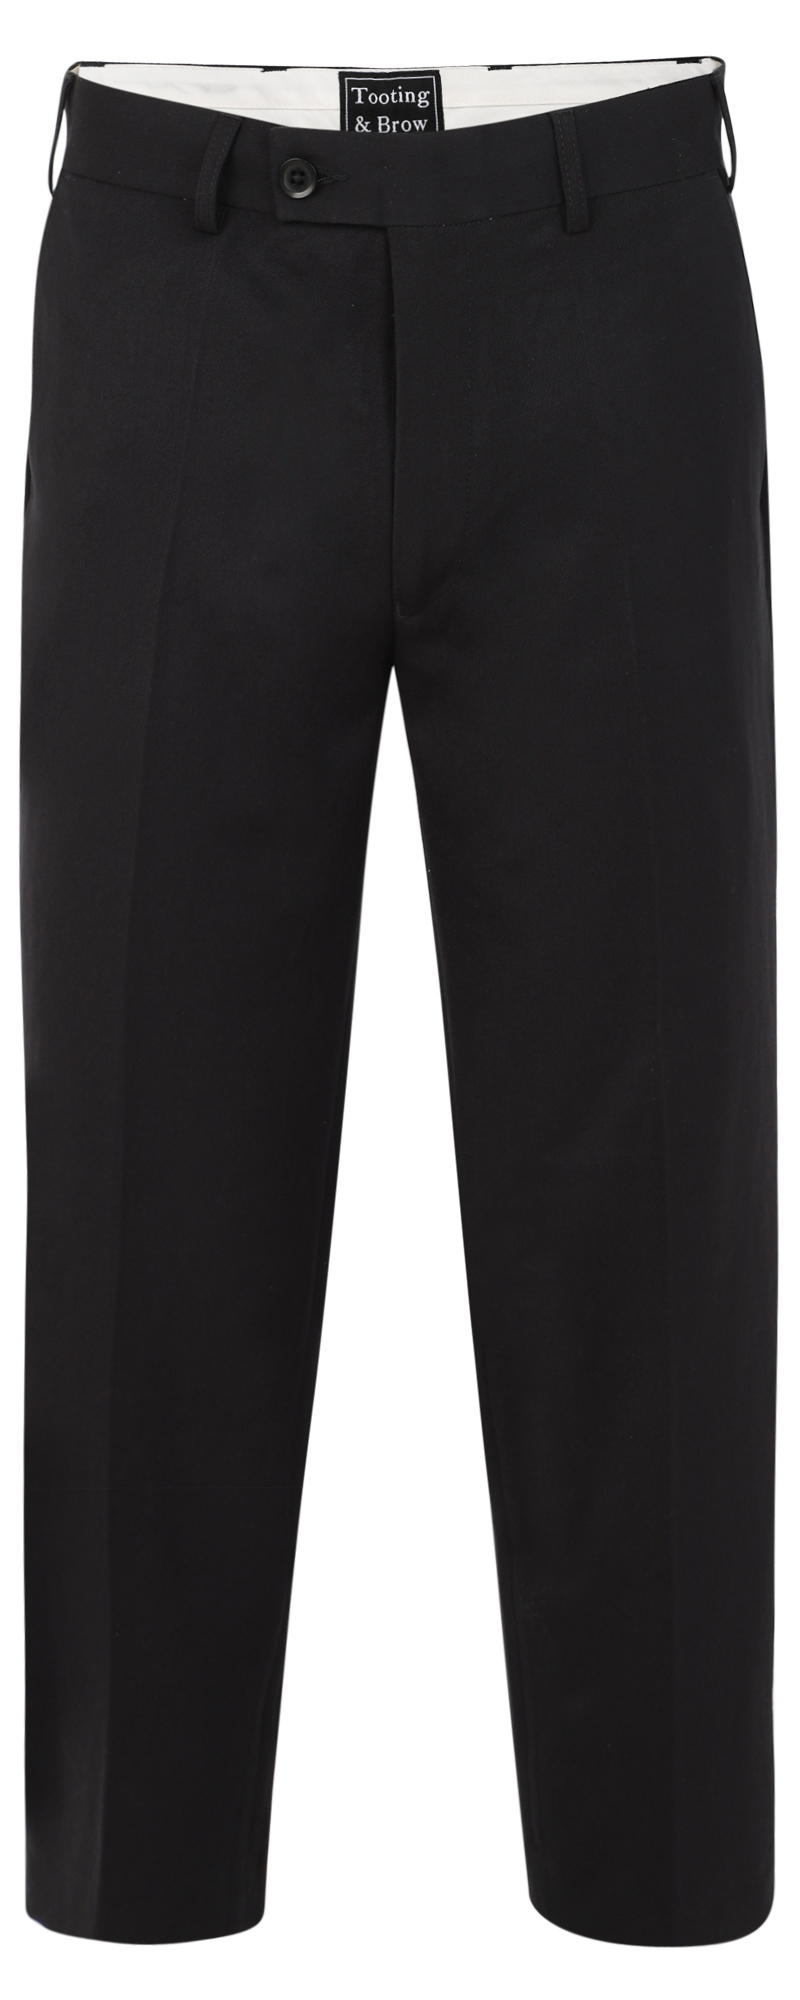 Grey All Weather Essential Cargo Stretch Pants